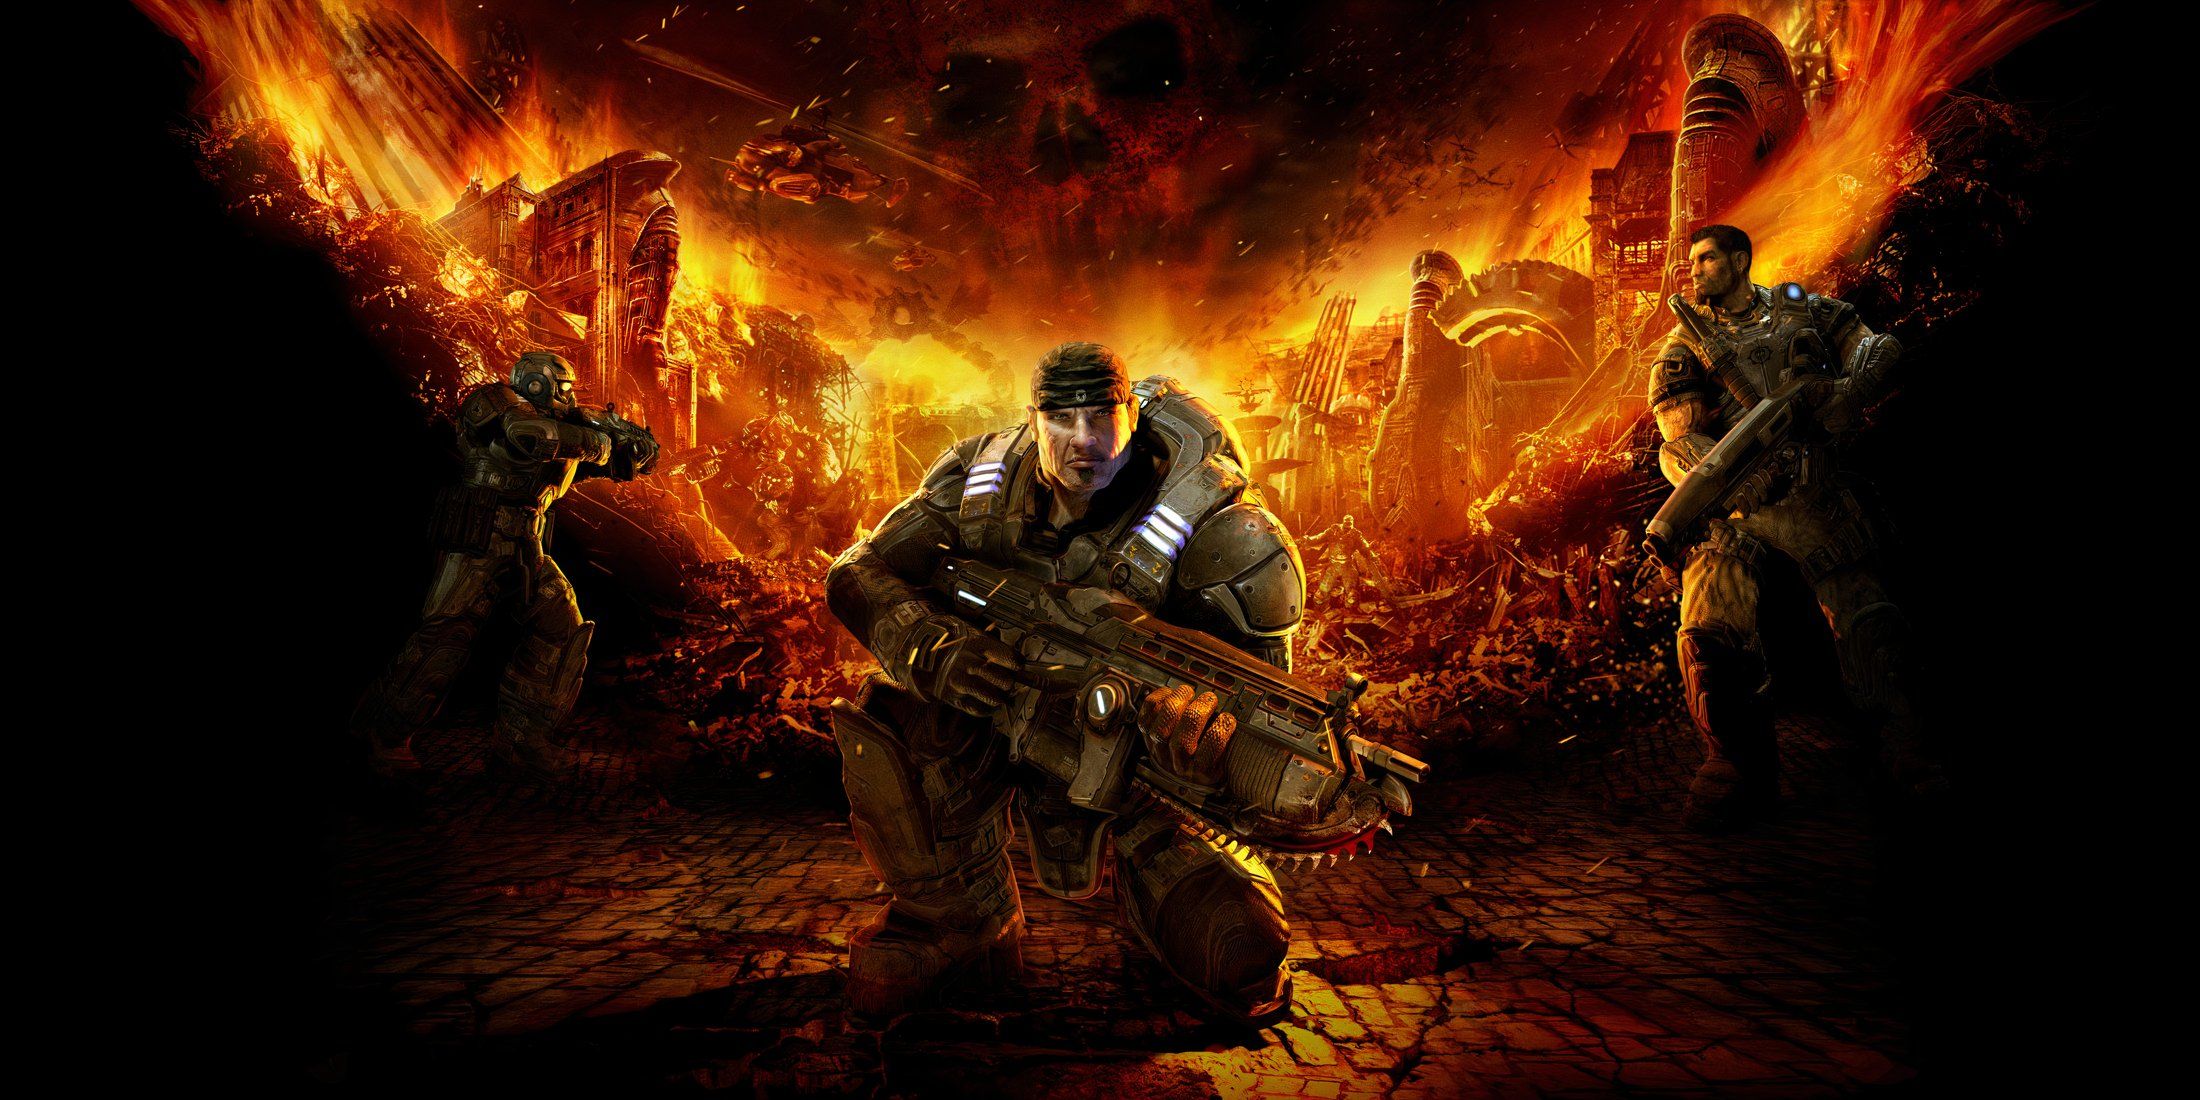 gears of war series gets massive player count spike